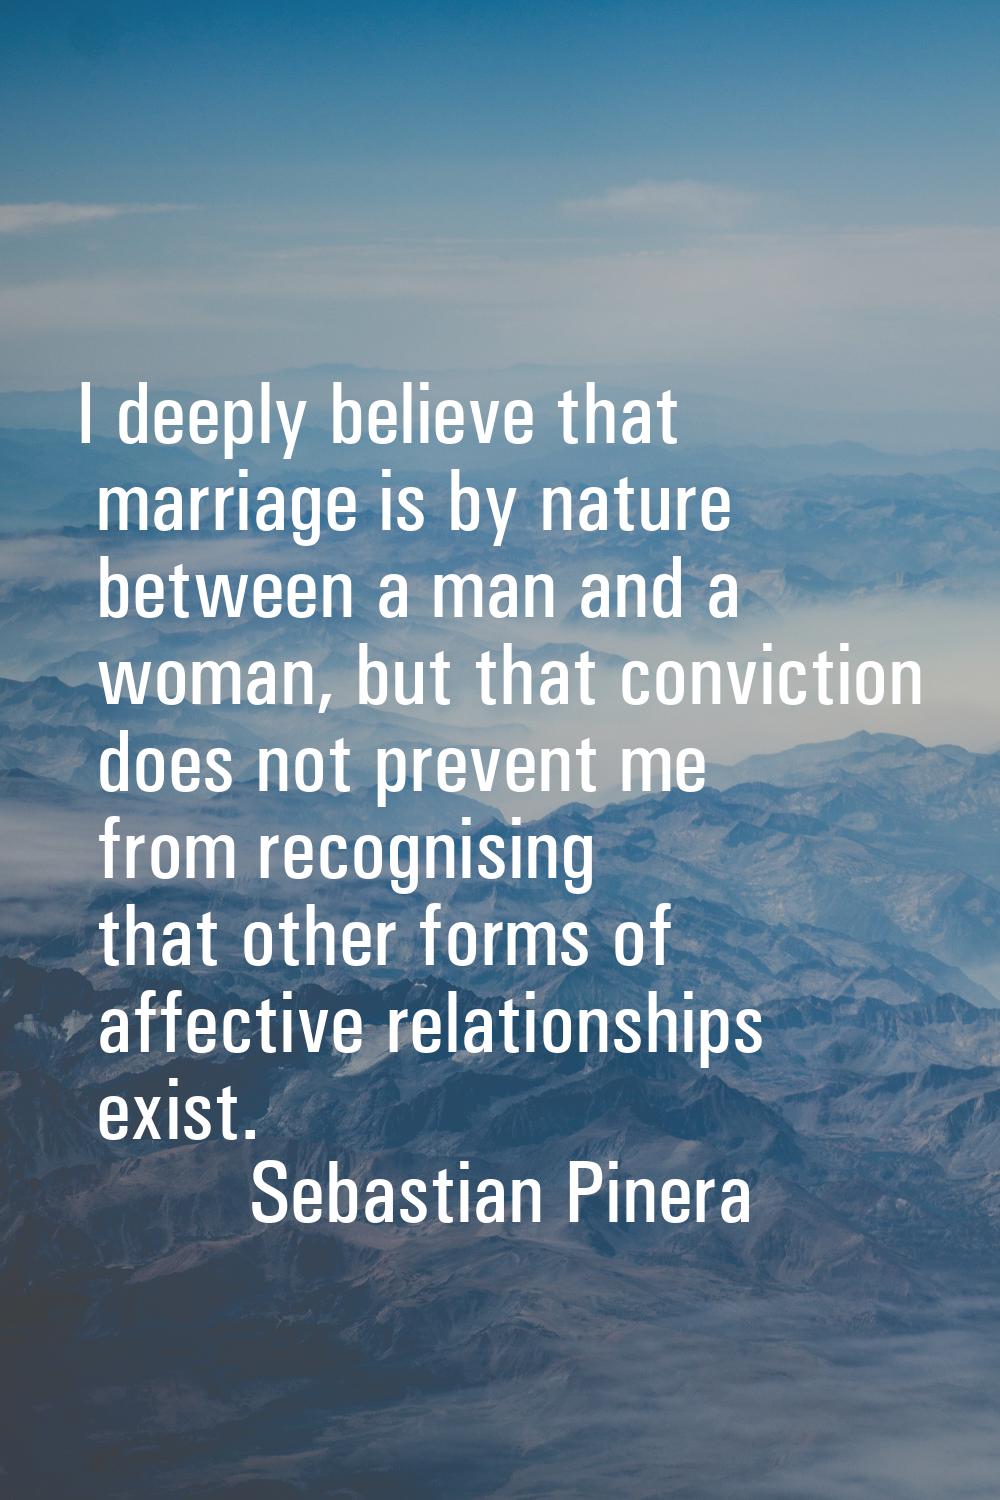 I deeply believe that marriage is by nature between a man and a woman, but that conviction does not